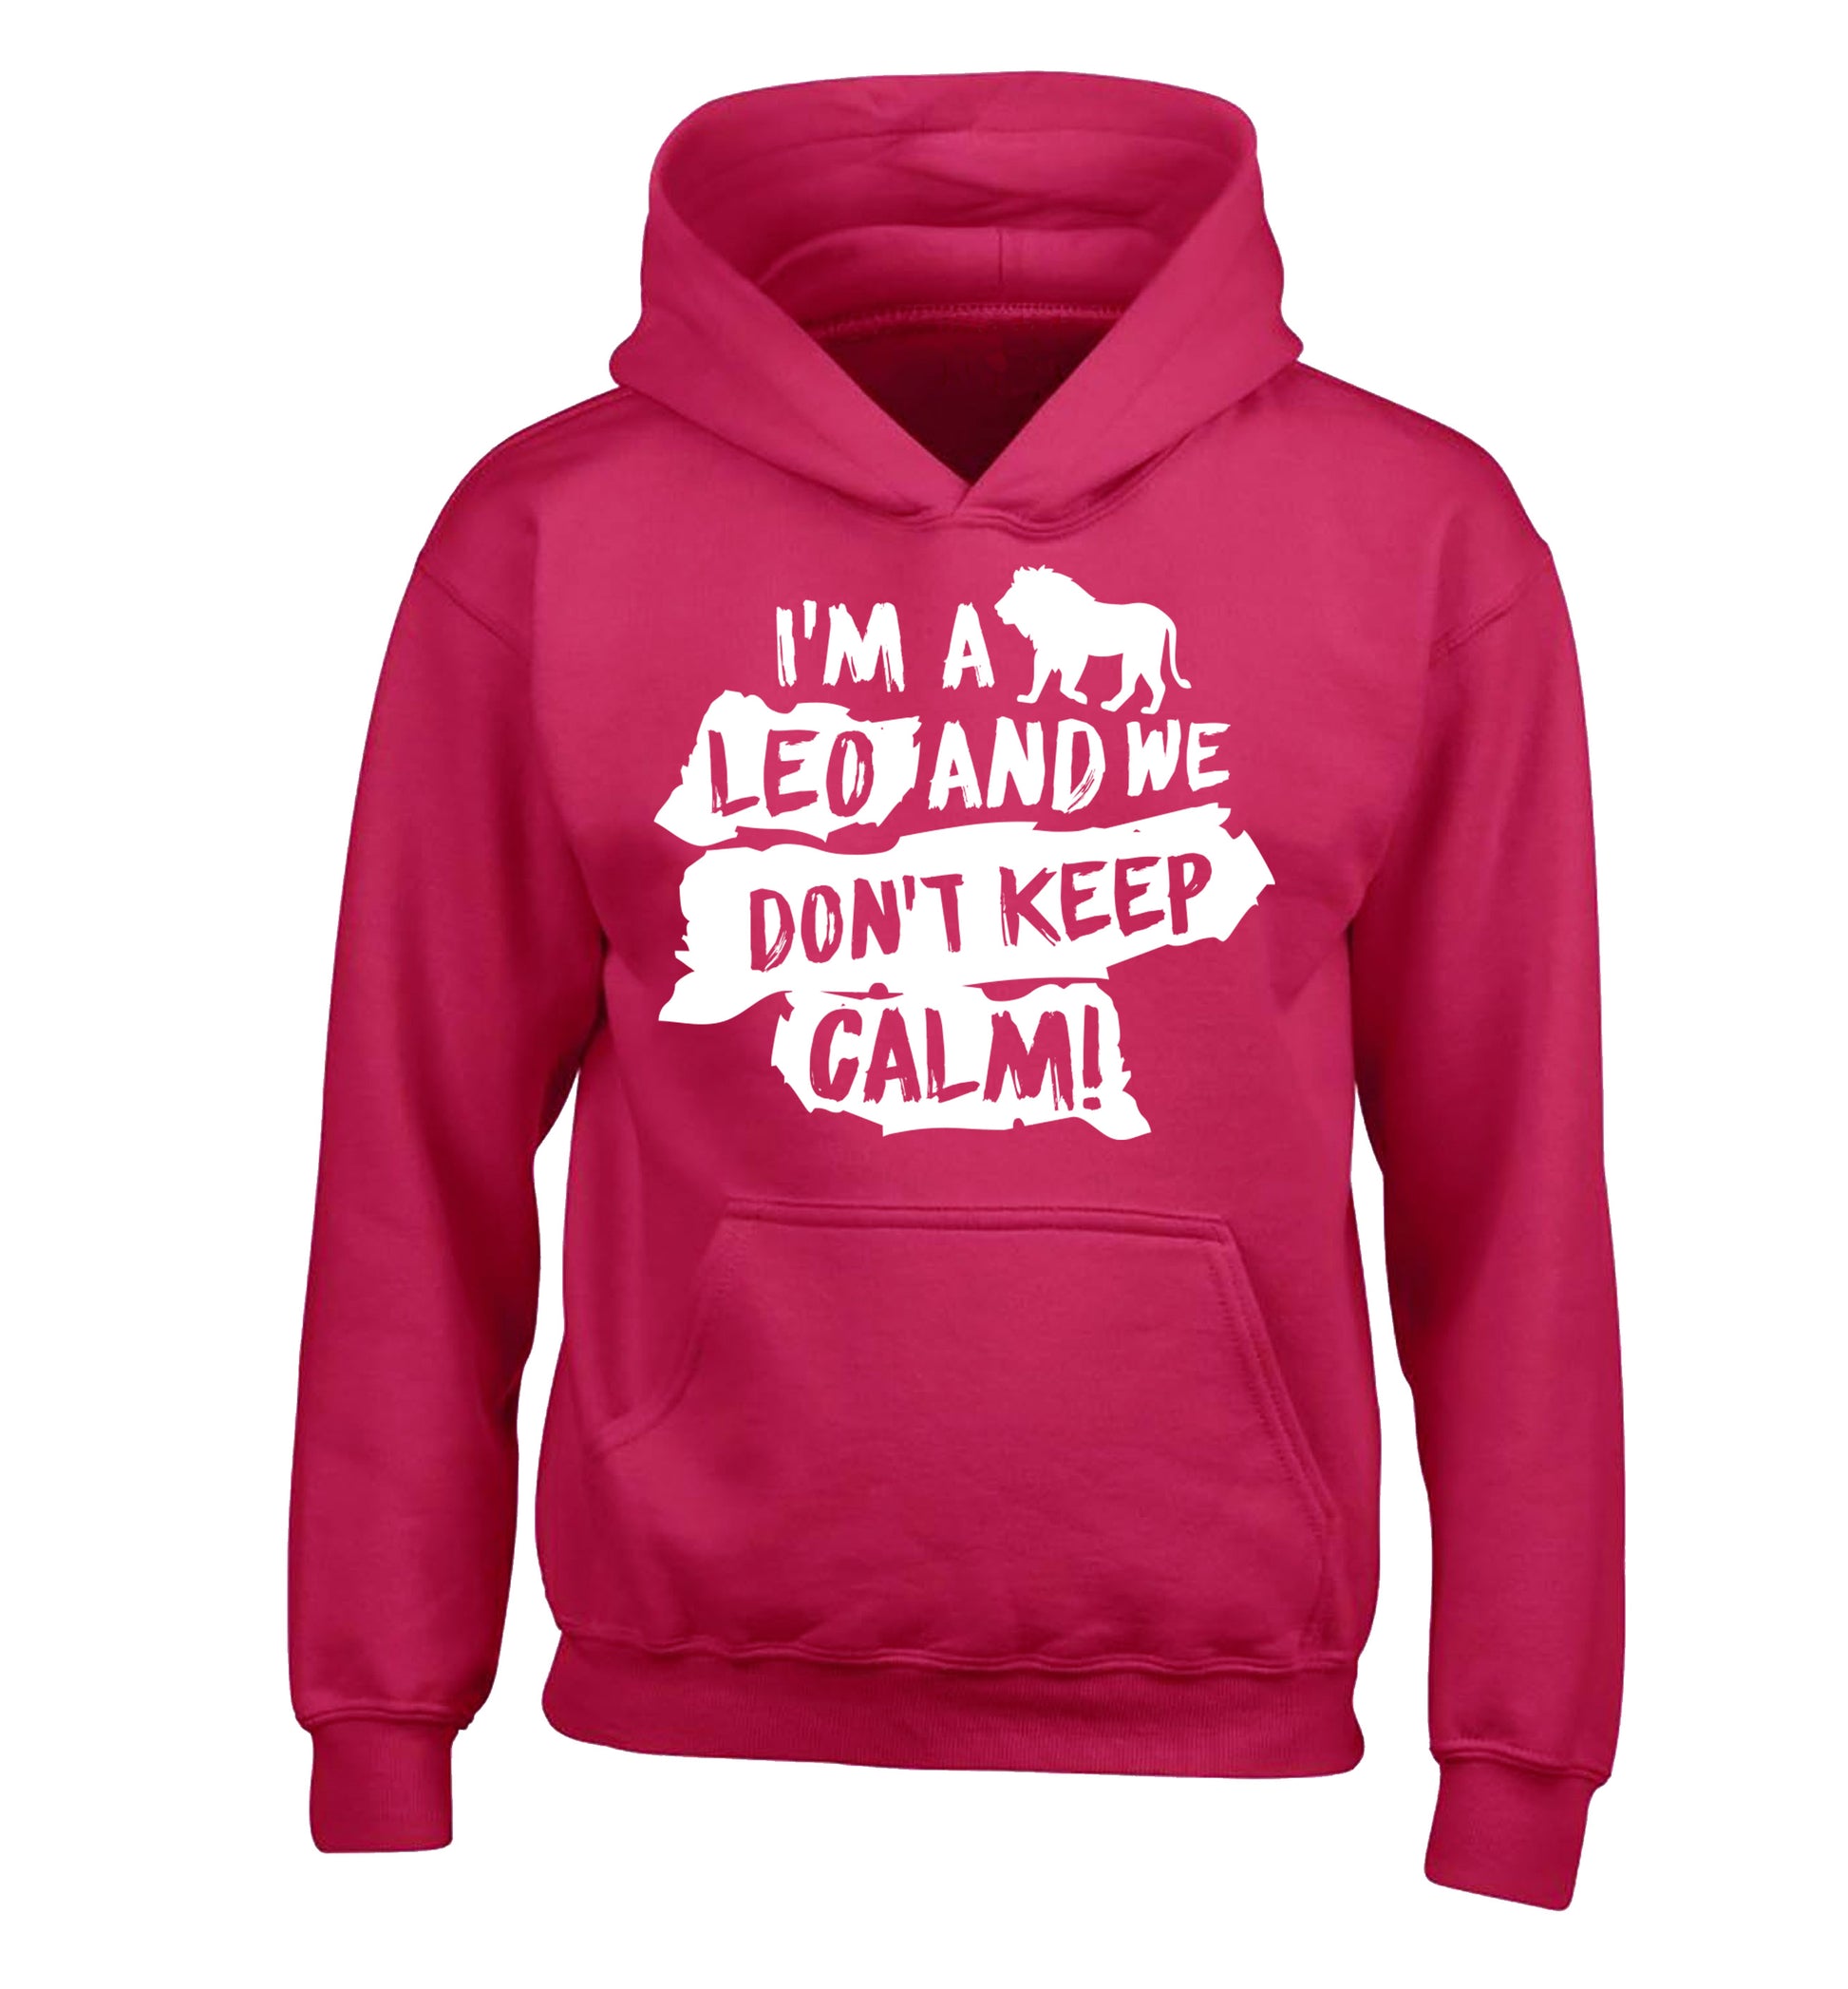 I'm a leo and we don't keep calm! children's pink hoodie 12-13 Years